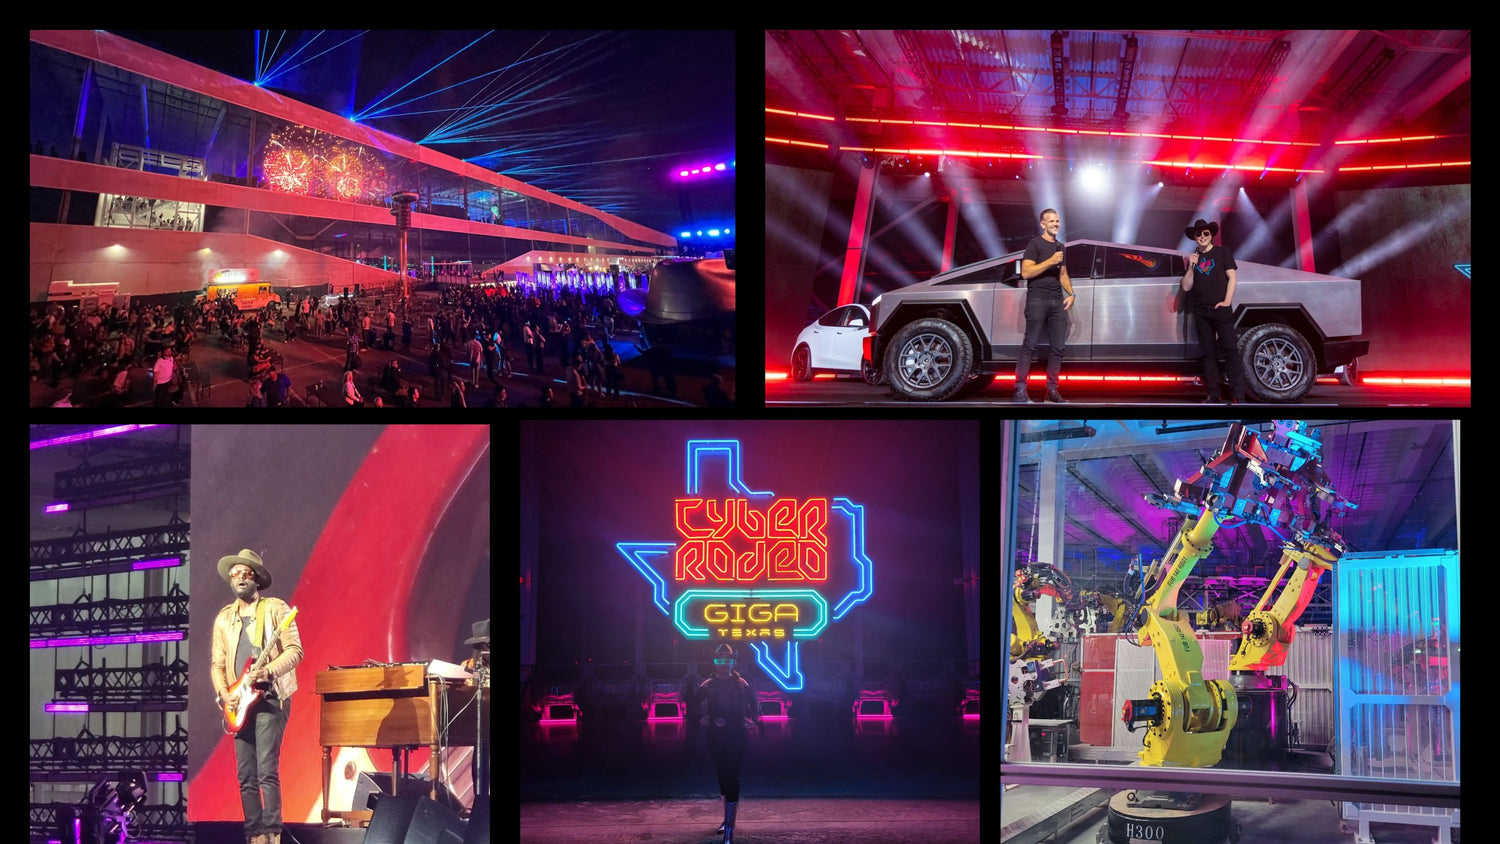 Elon Musk's Tesla Gigafactory Texas Cyber Rodeo Party Was Incredible –Cars, robots, music, bull riding, drone show, even a tattoo parlor & petting zoo!